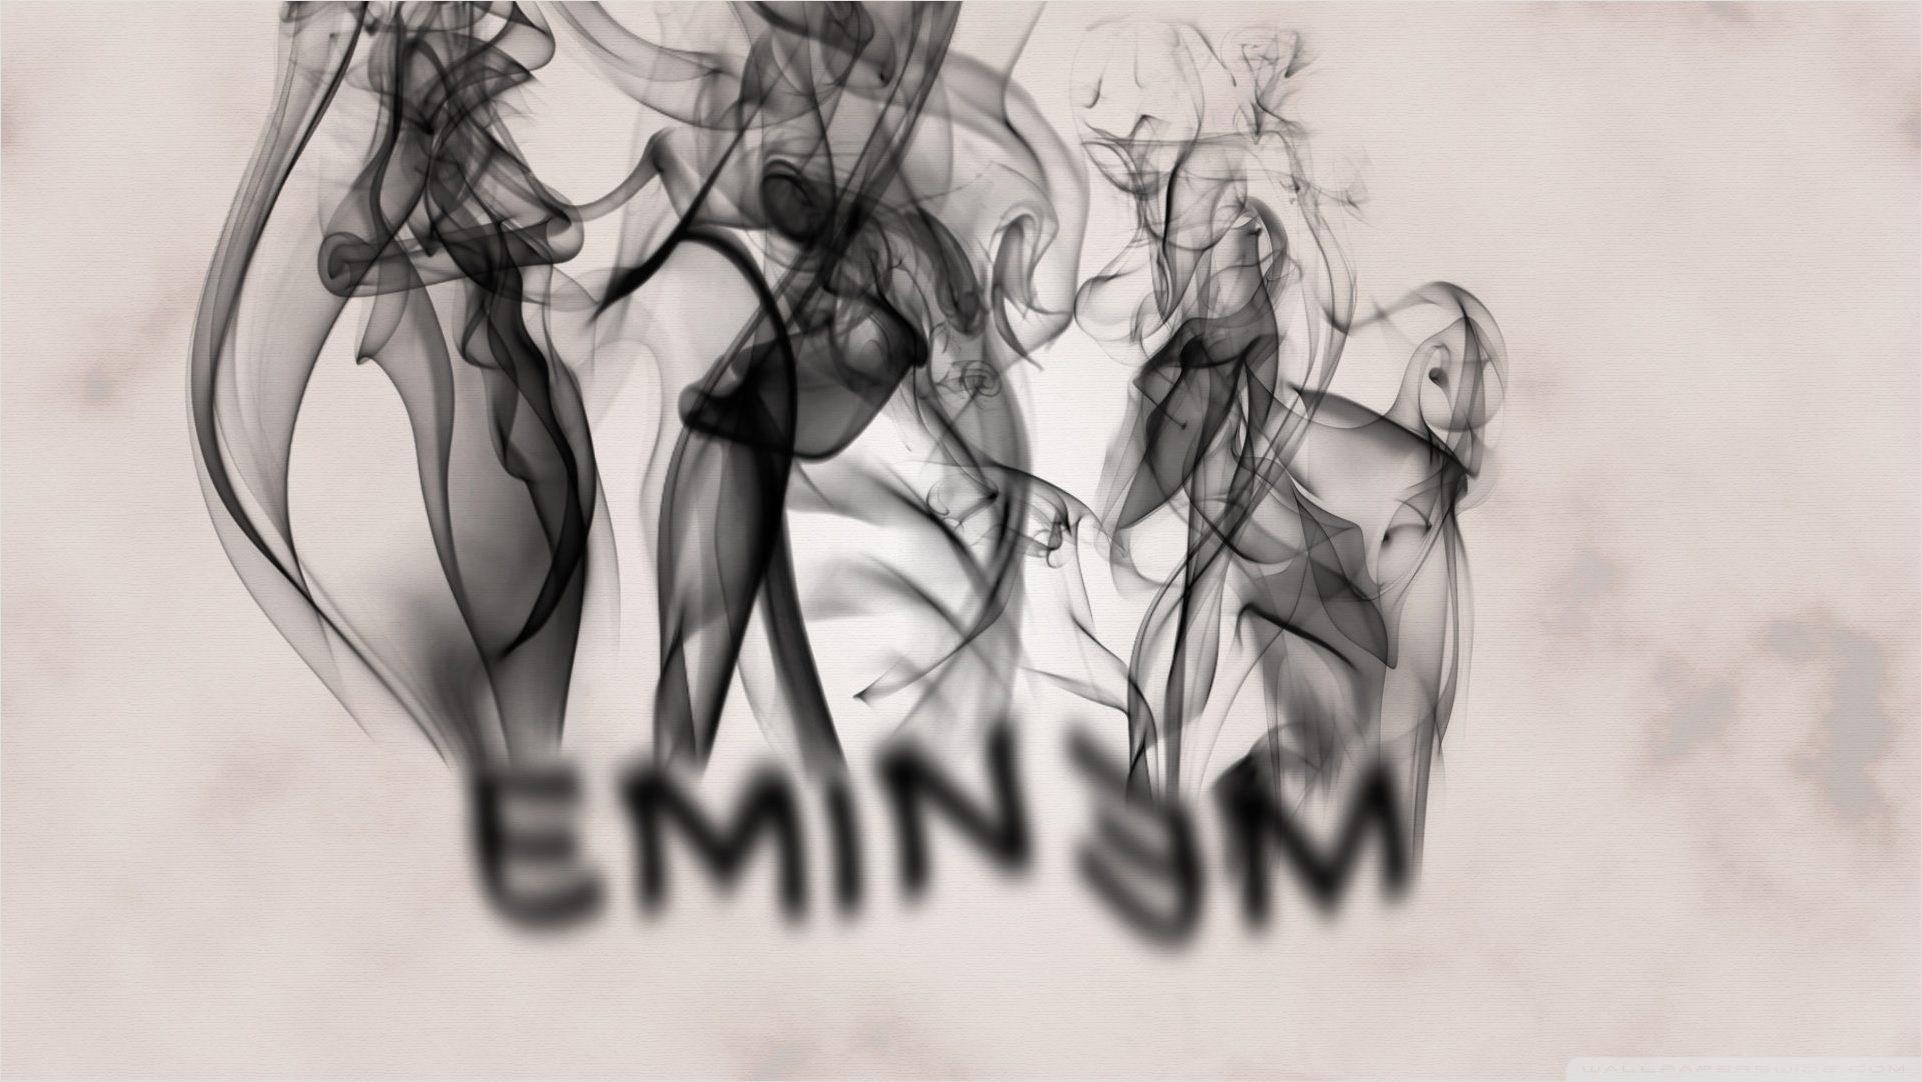 eminem wallpaper,drawing,sketch,figure drawing,black and white,monochrome